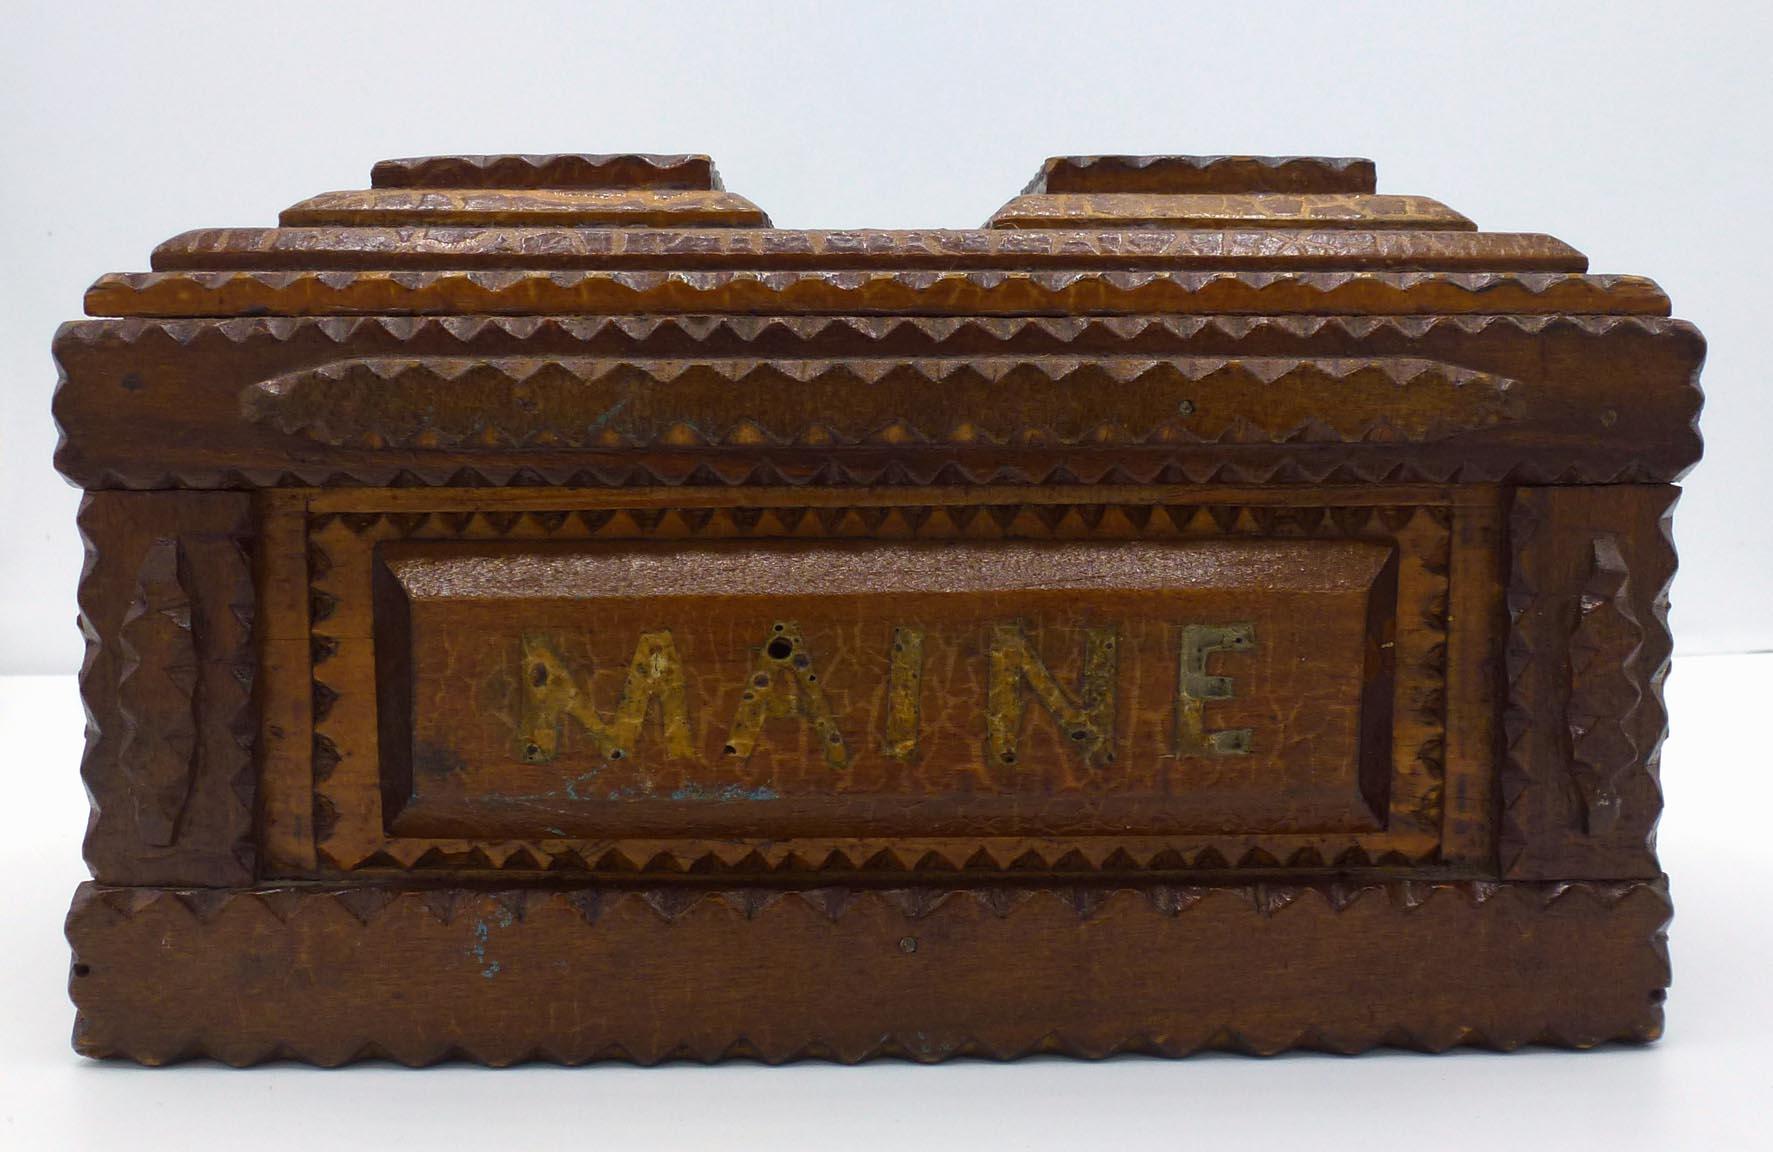 This is a tramp art bank with a beautiful alligatored surface. It is dated 1926 on the top, with the words 